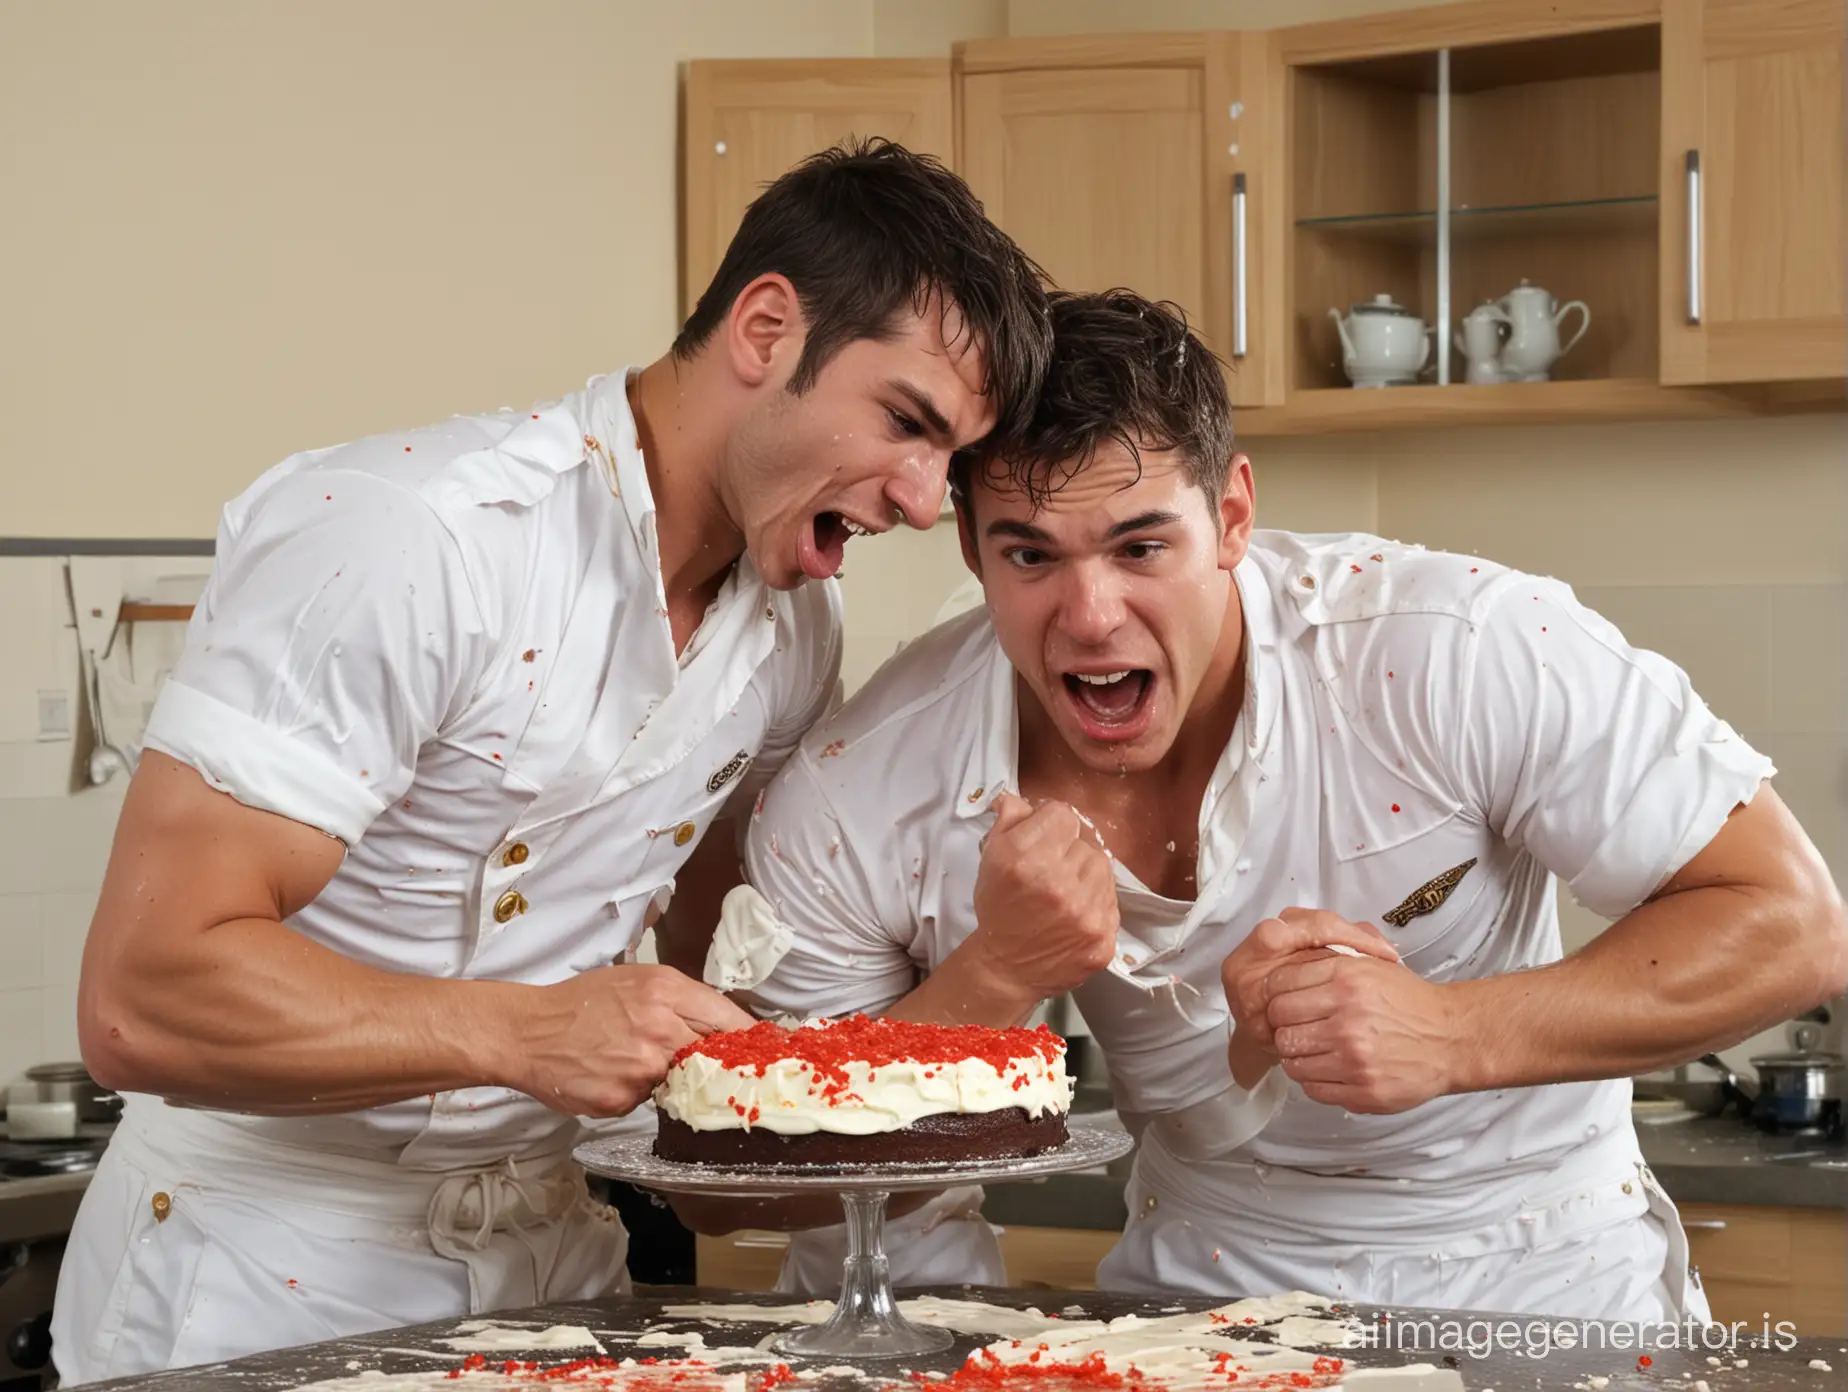 two young uniformed muscled sailor wrestling and cake fighting, in kitchen, impacts cake, hits cake, cake in ruin, face in cake, atractive face, wet dirty, uniform covered in cake and cream, fighting and wrestling, fist fight, pressing your face into the cake and cream, trampling the cake, back on the cake, back pocket, cream on the face